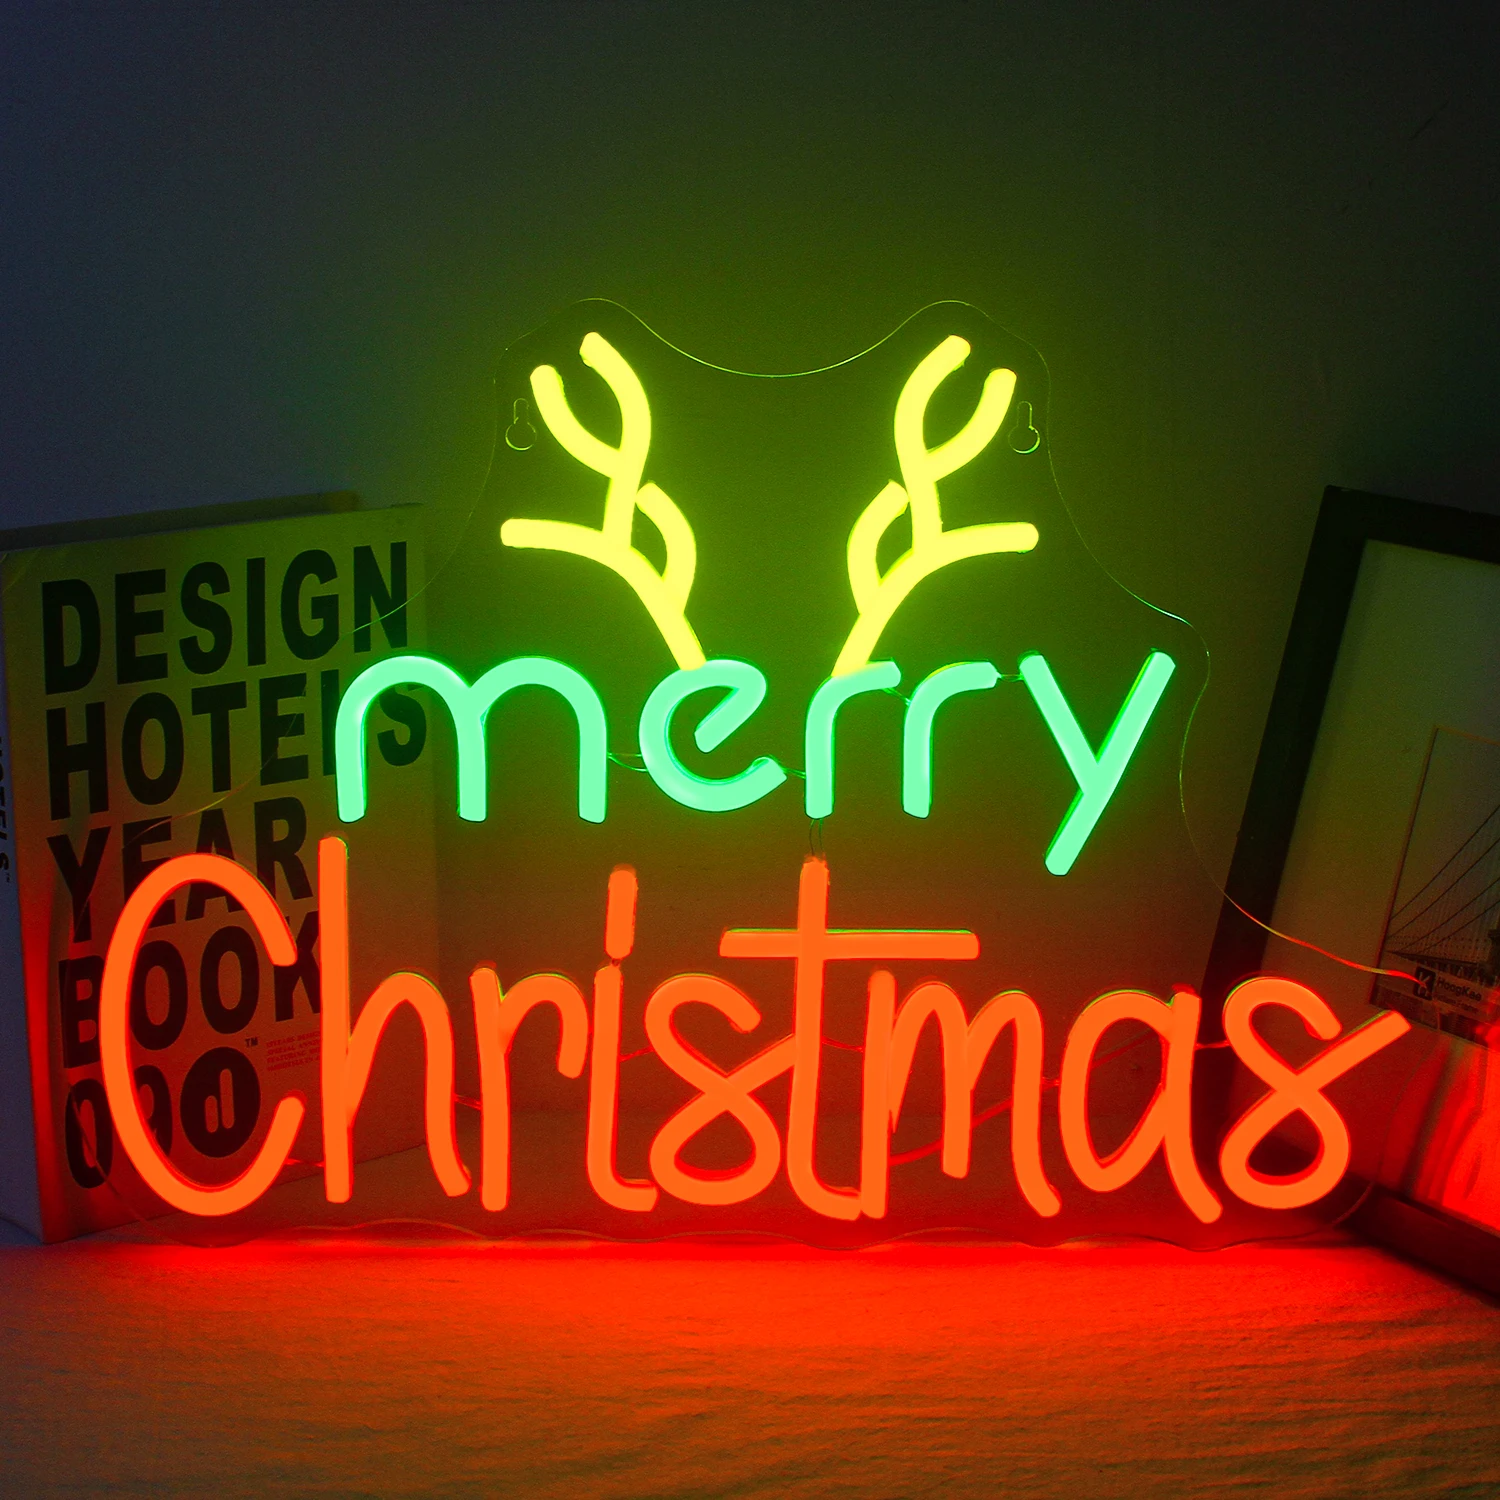 

Merry Christmas Neon Sign Led Santa Hat Neon Lights for Wall Decor Signs for Bedroom Home Party merry christmas Decorations Gift